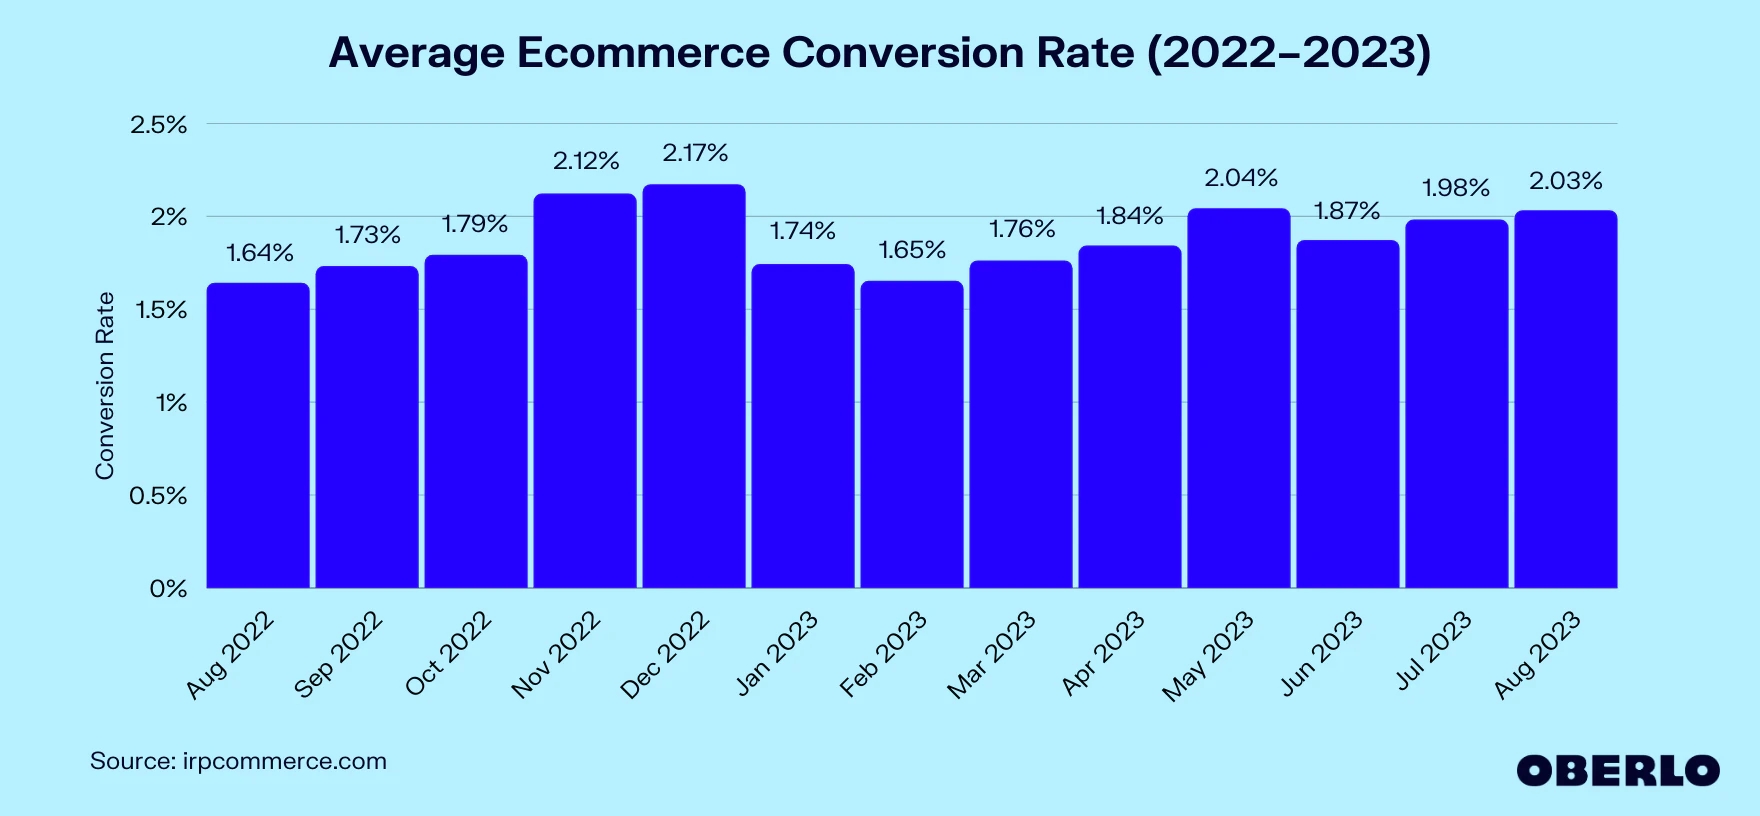 Average Ecommerce Conversion Rate 2022-2023